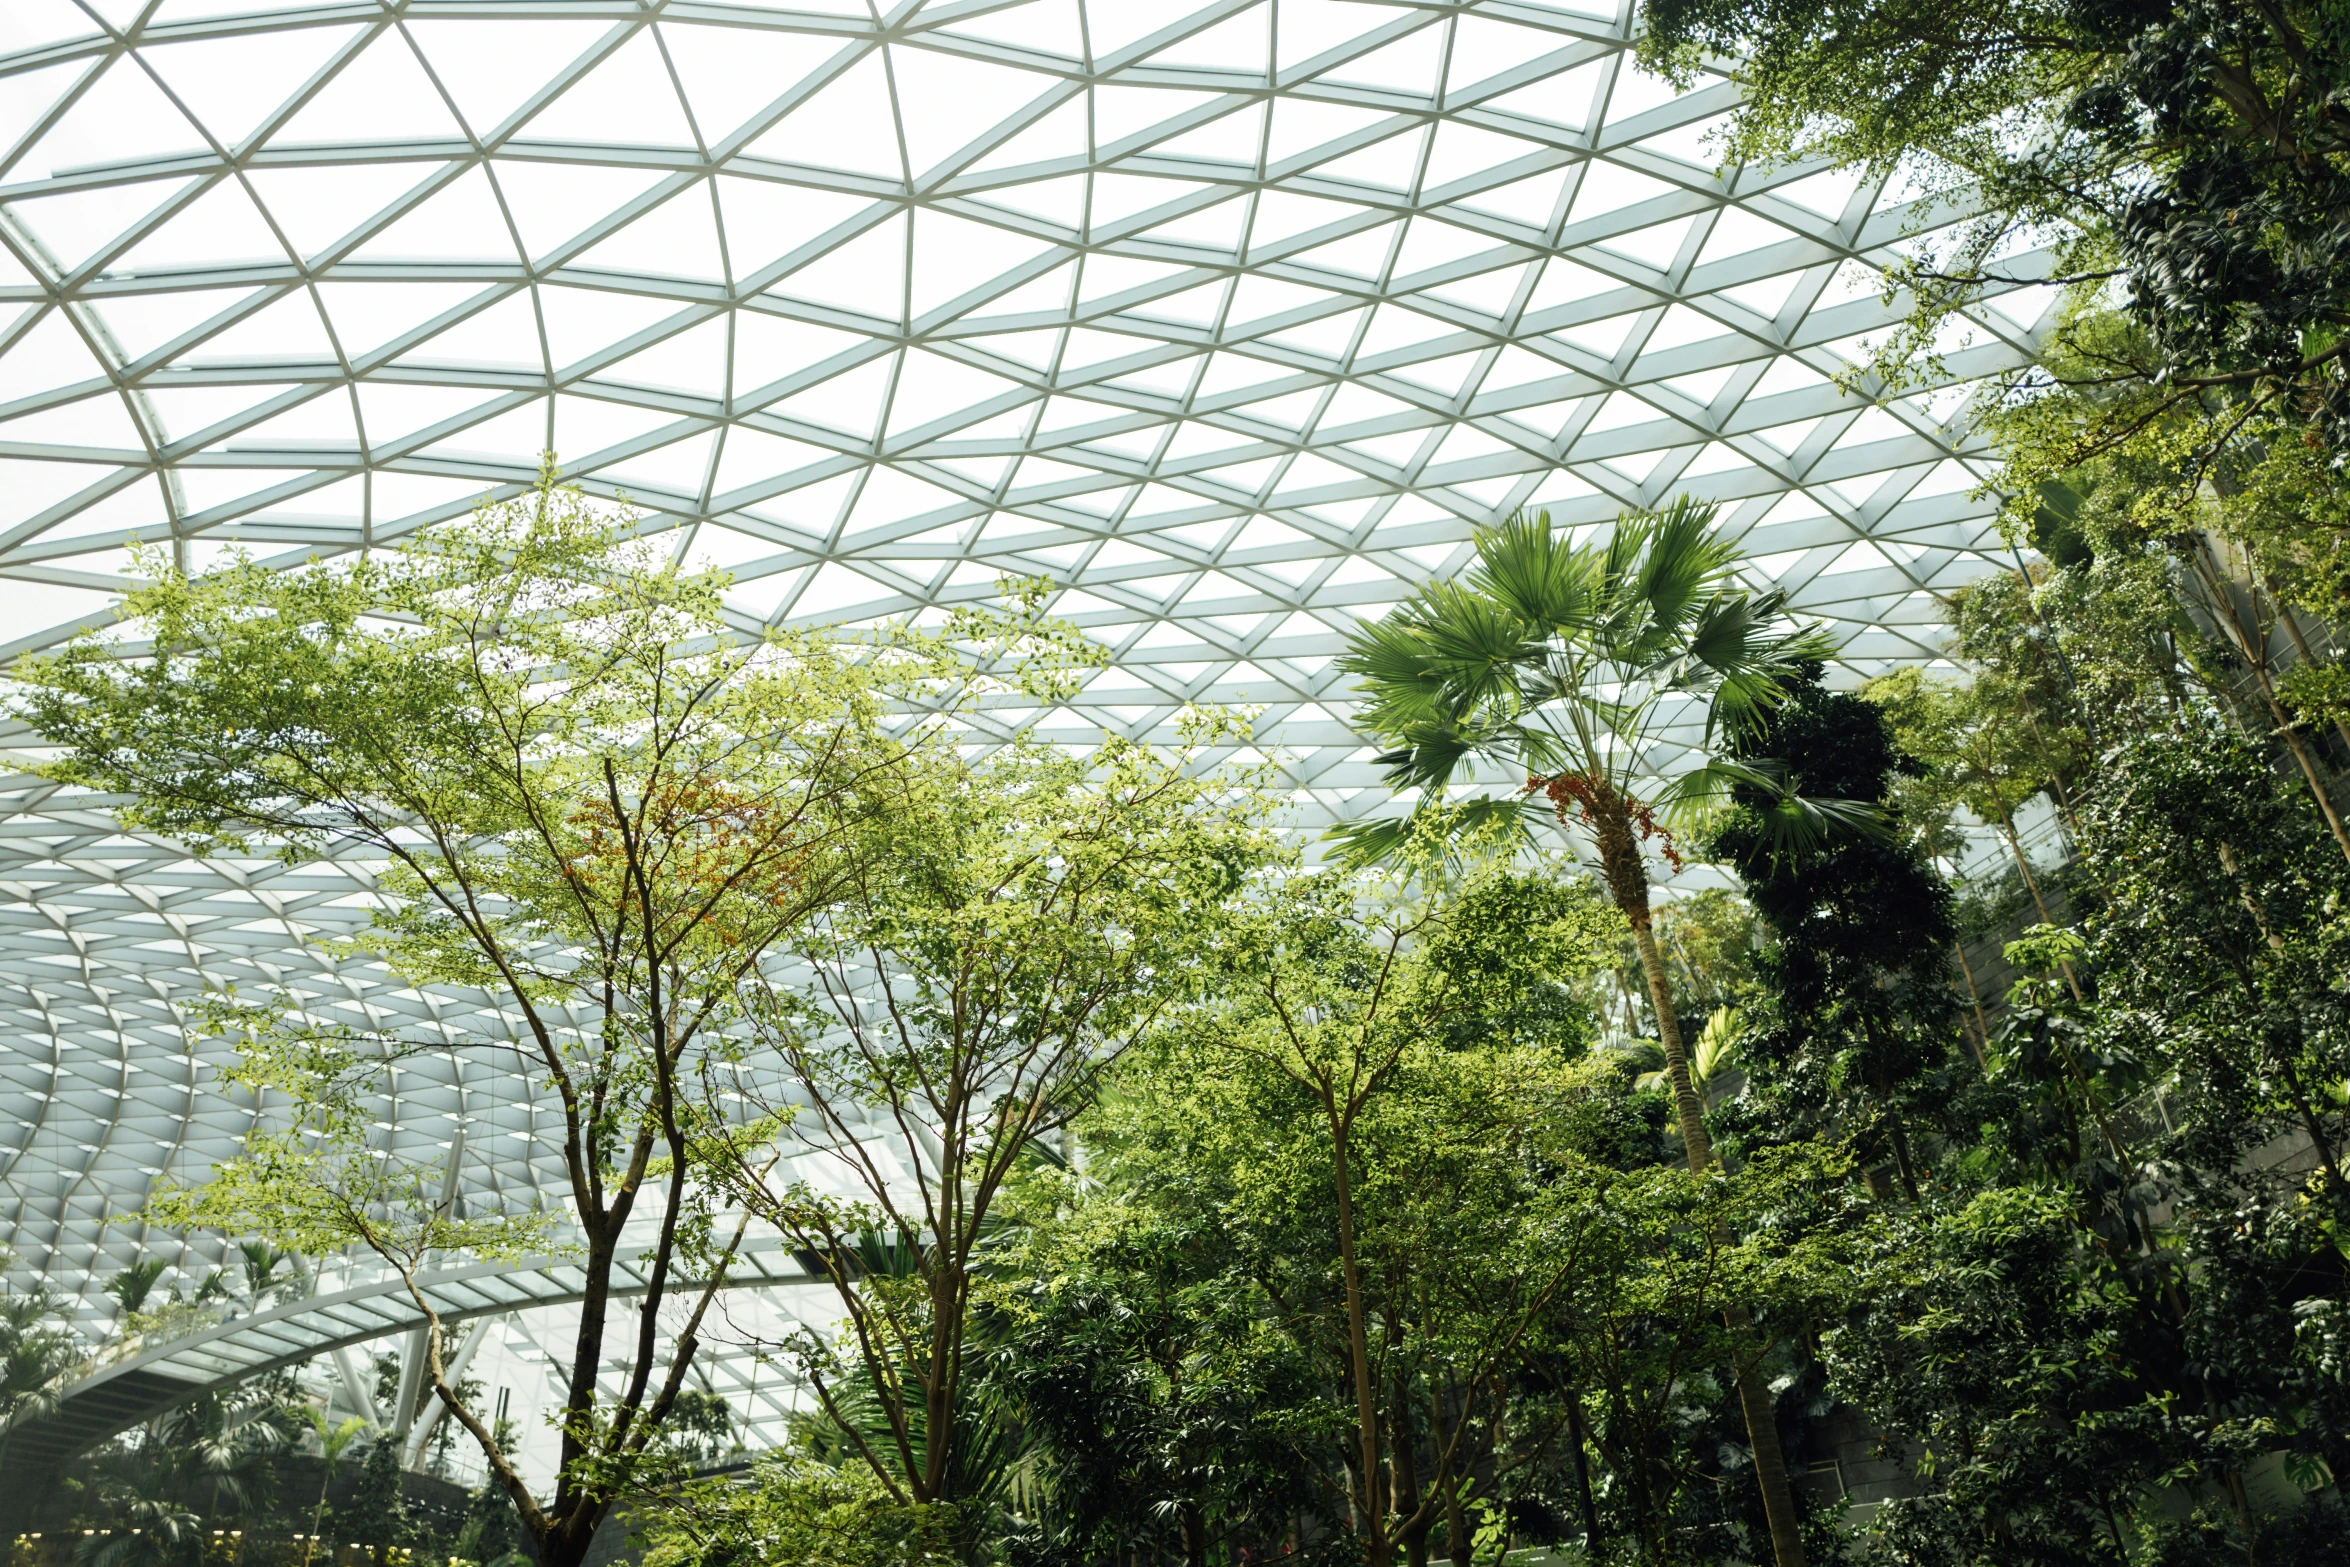 trees inside a glass dome with the vegetation in the foreground